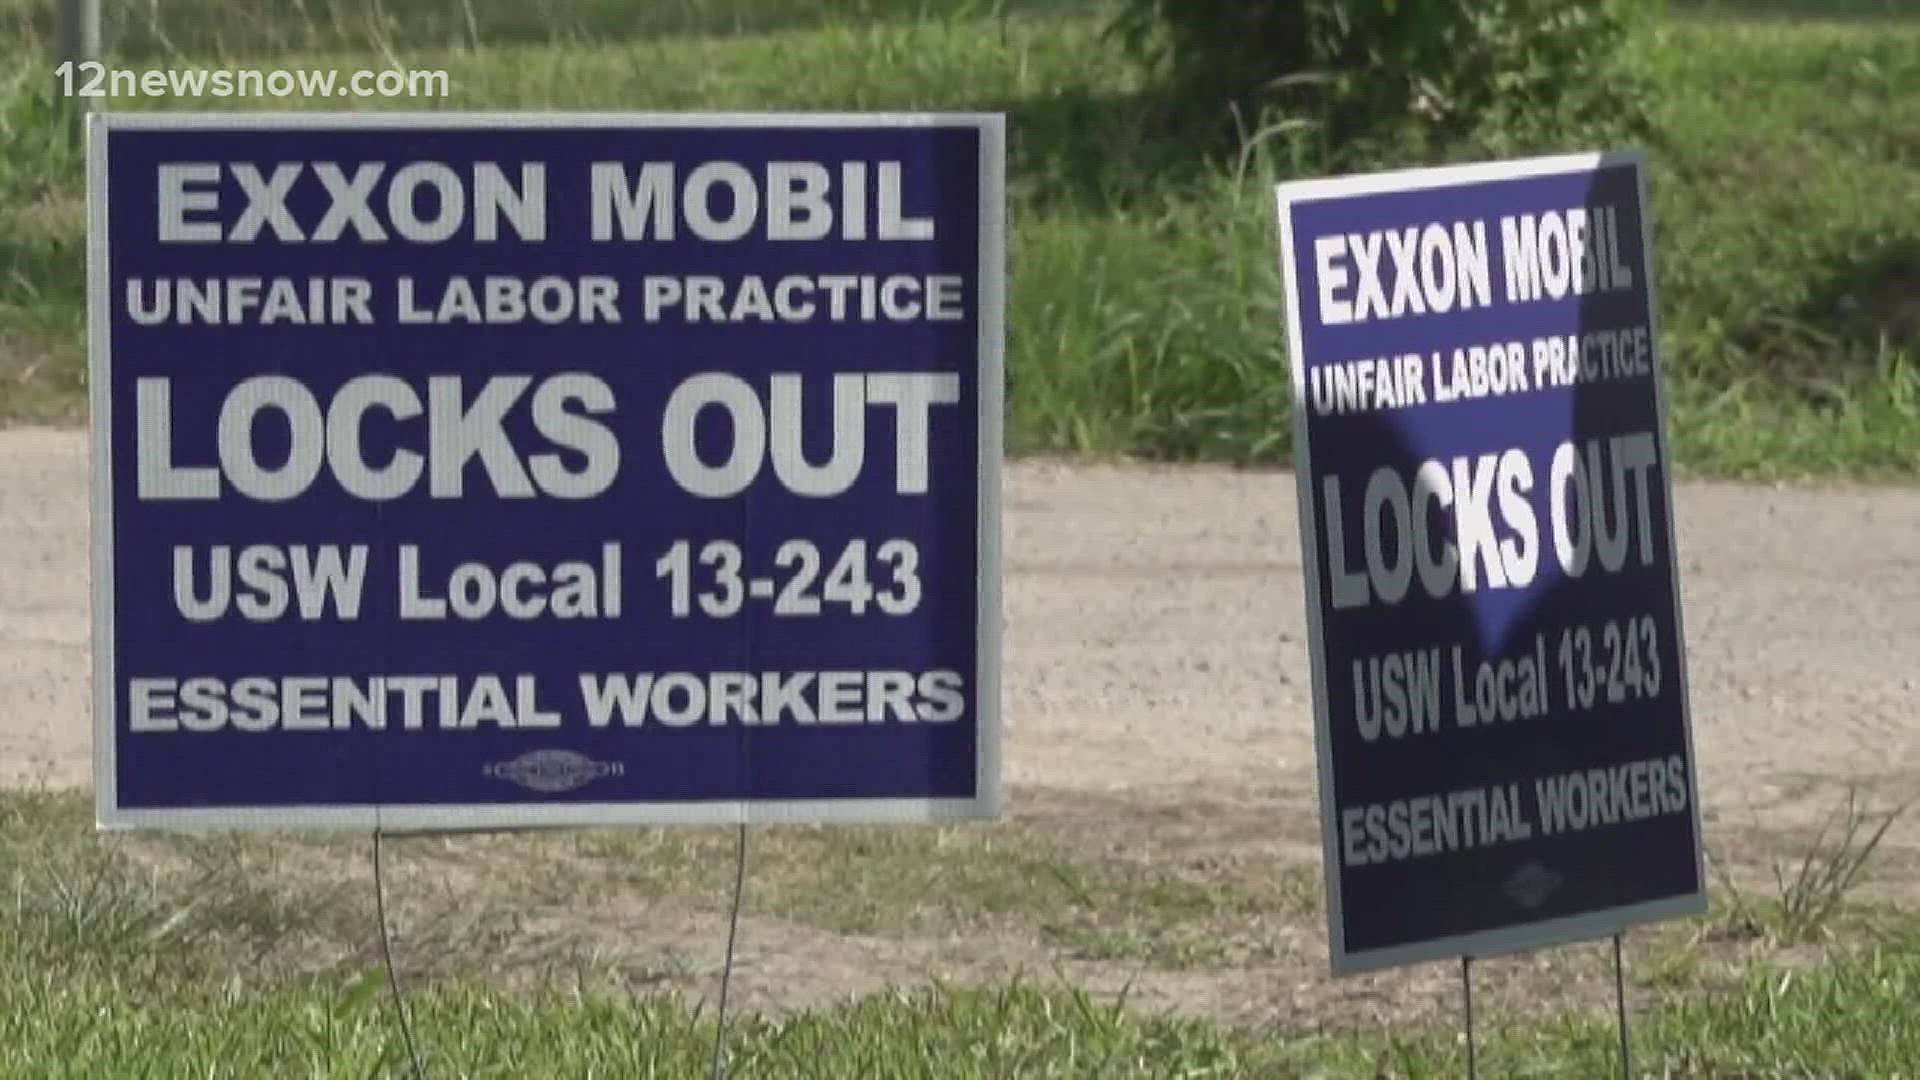 ExxonMobil says the petition is close to getting the necessary signatures to relieve the union of representation.